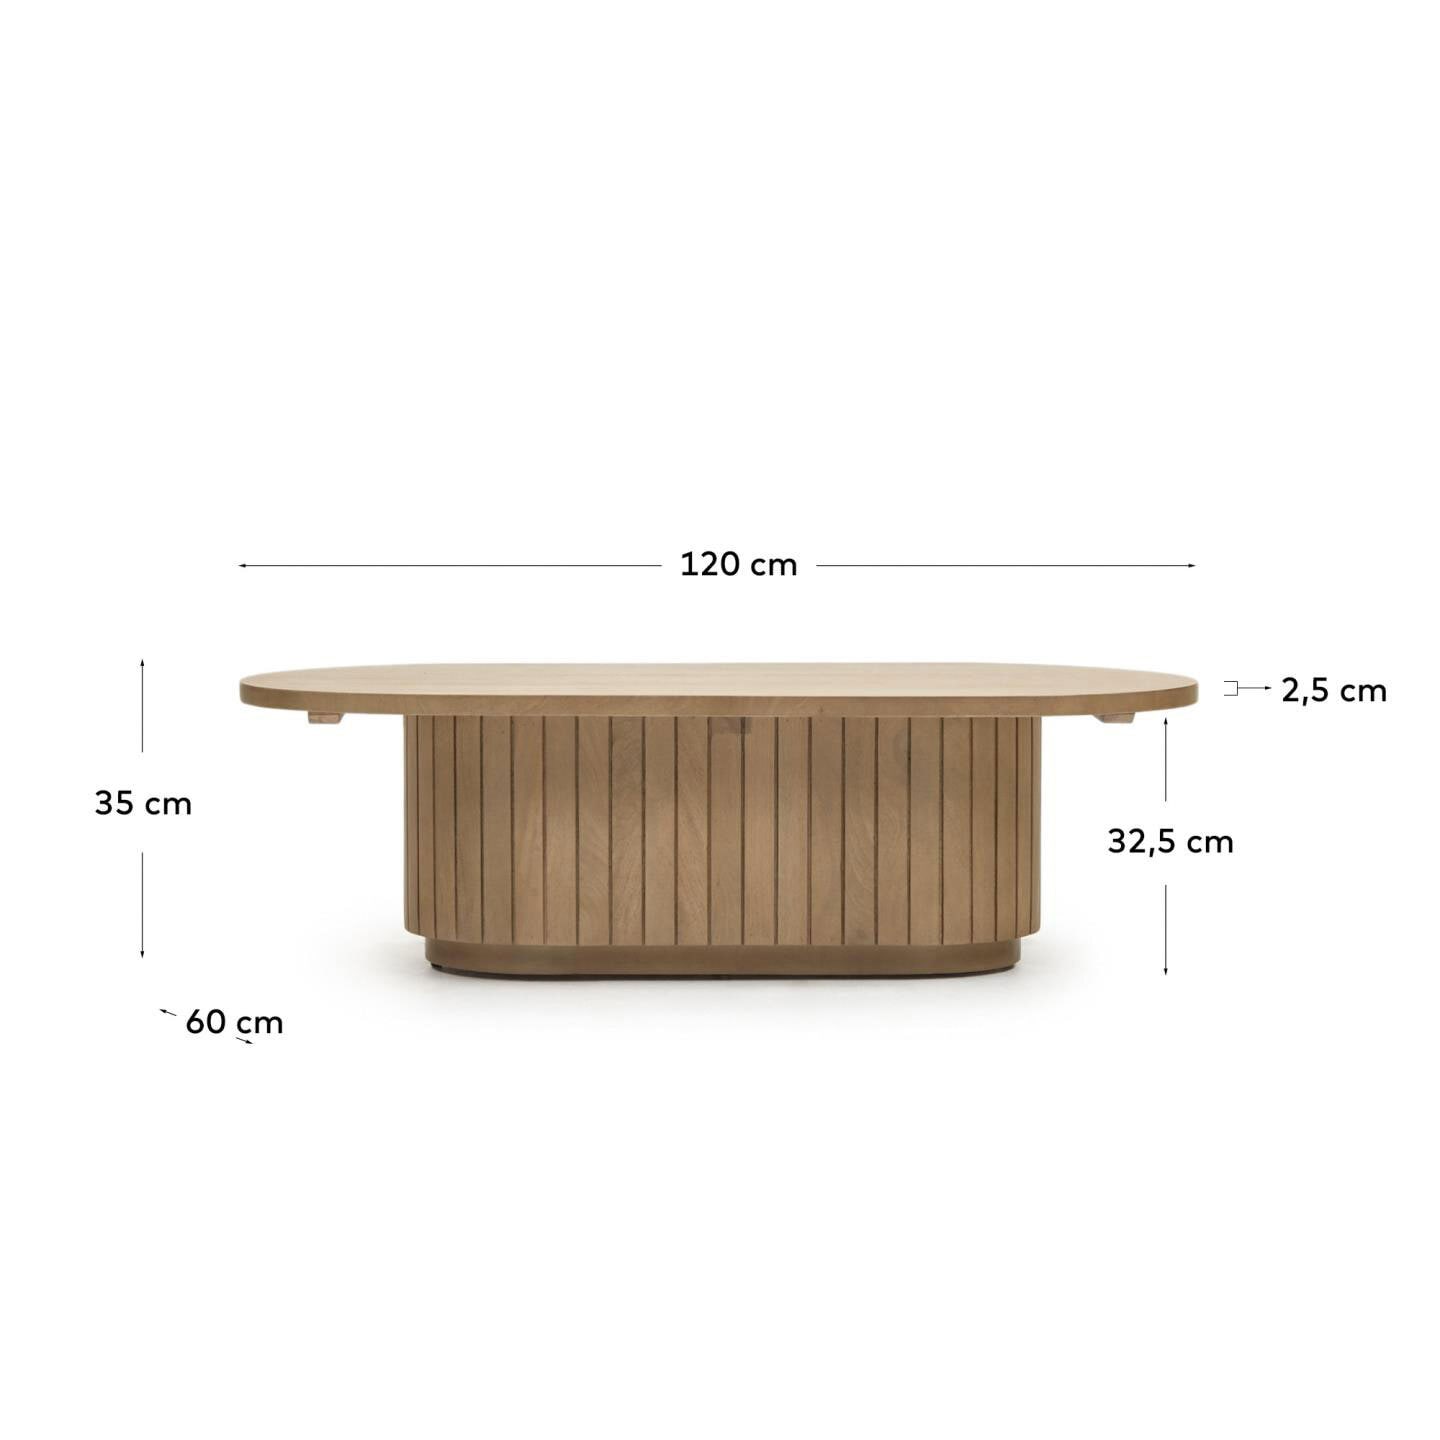 Kave Home Couchtisch LICIA oval 120 x 60 cm natur